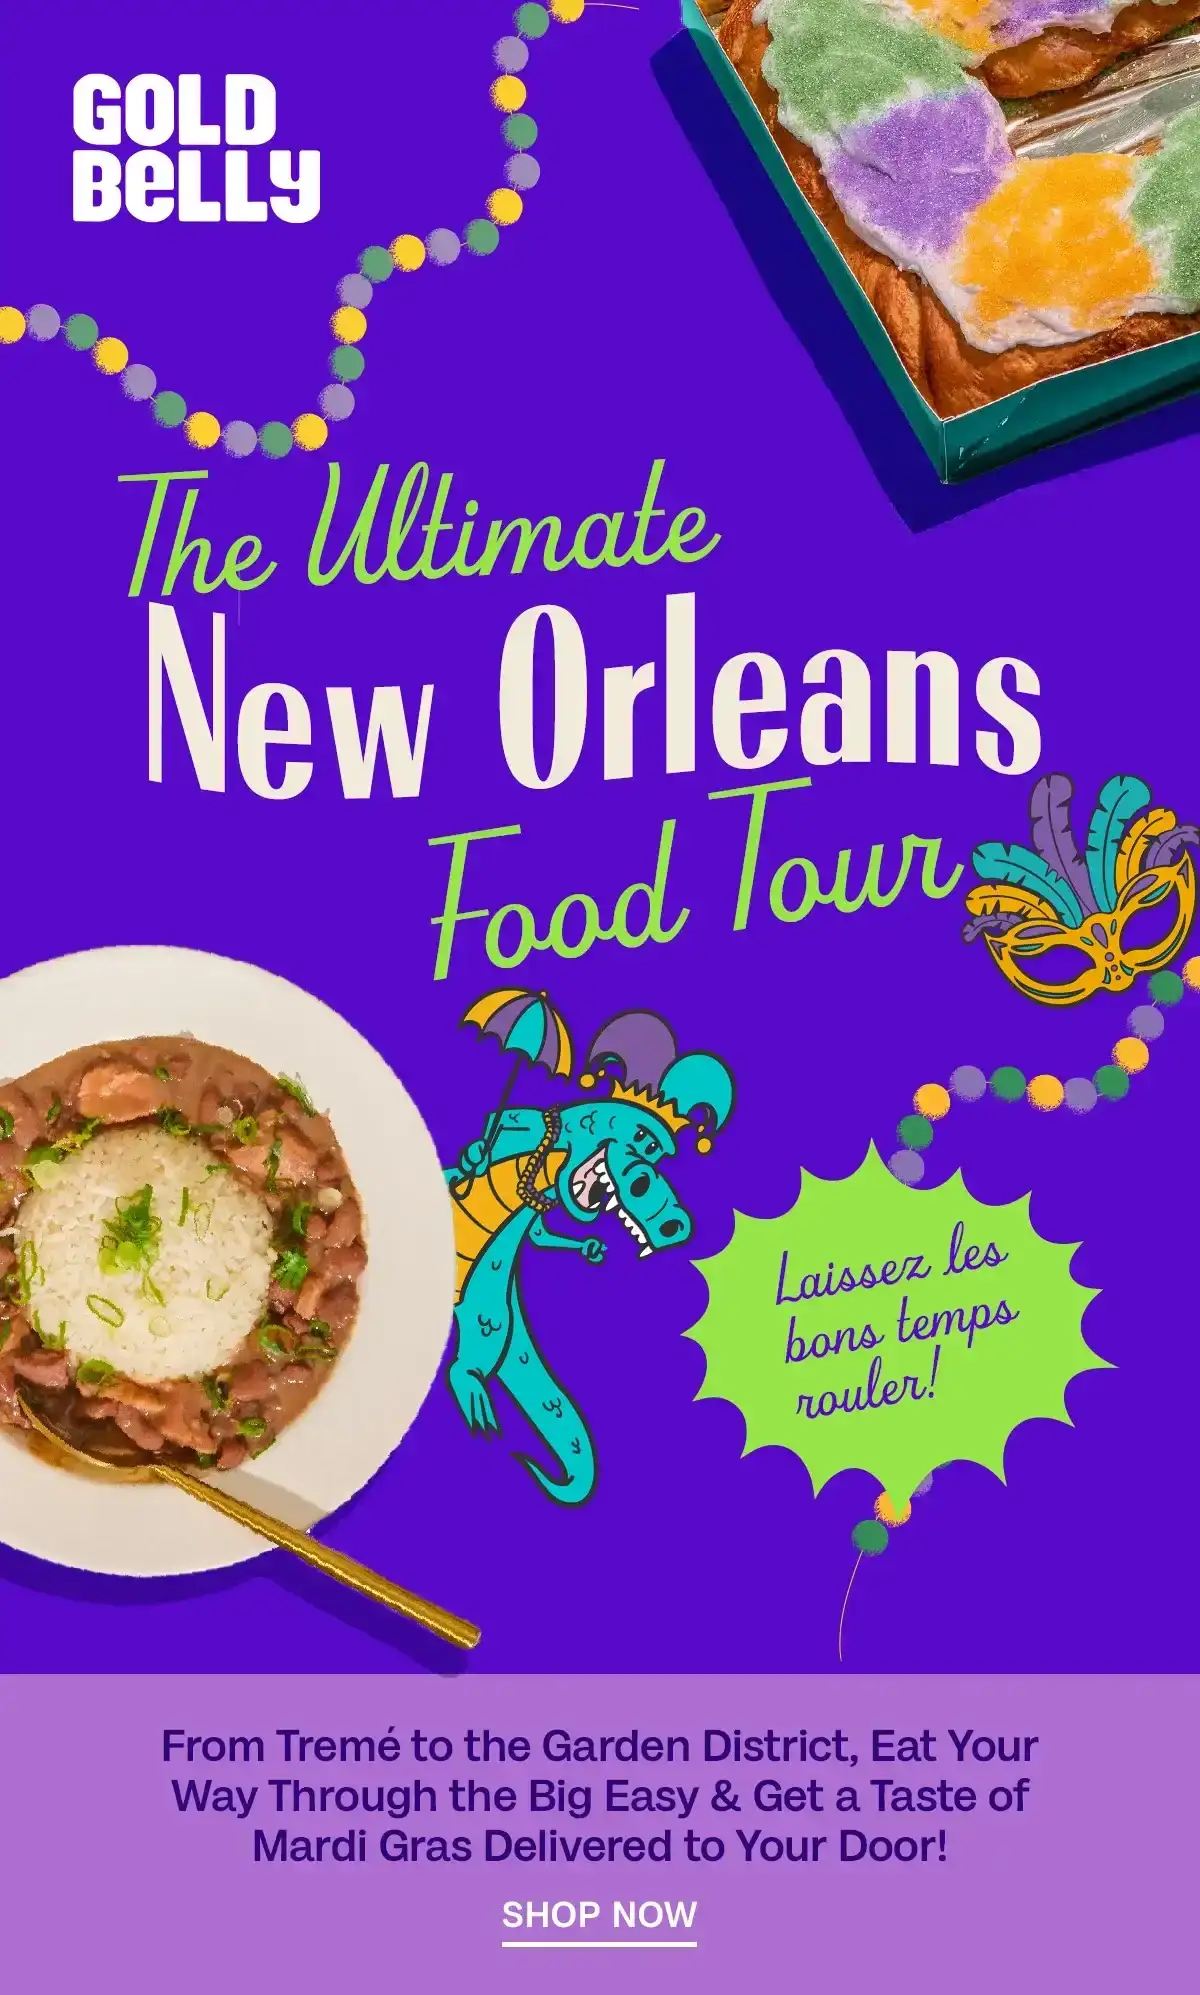 The Ultimate New Orleans Food Tour